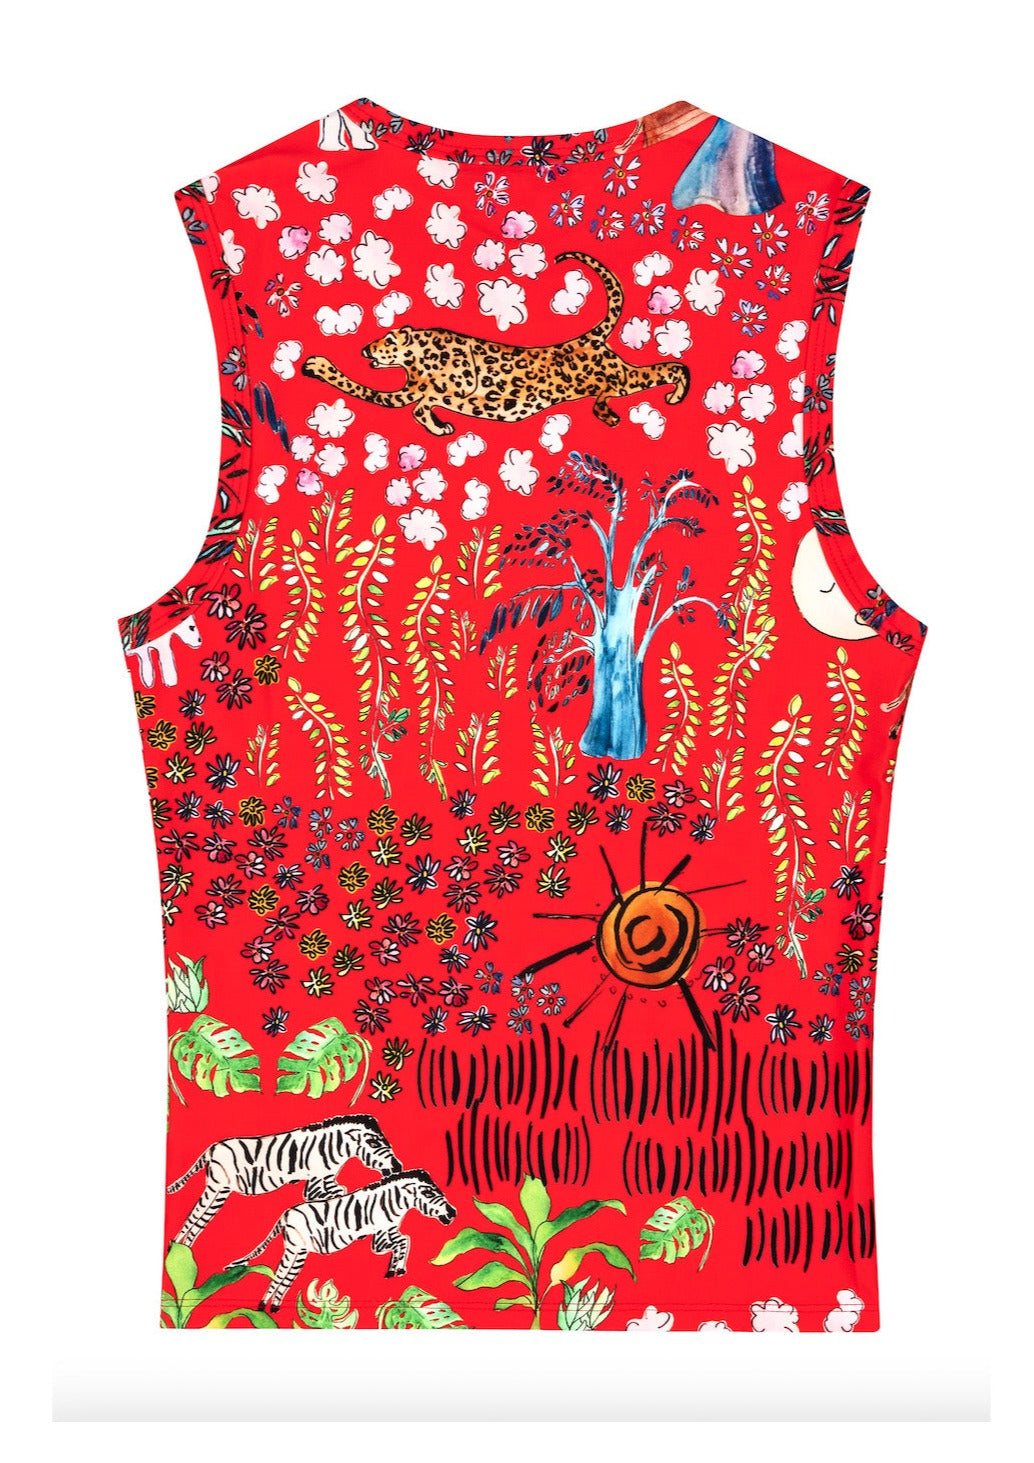 The platonically ideal high-cut tank top in our signature red Fever Dream print, a delightful smorgasbord of happy animals and botanicals. Made from a recycled polyester blend that is both anti-bacterial and moisture-resistant, meaning this top can also be worn as a swim top or rash guard.